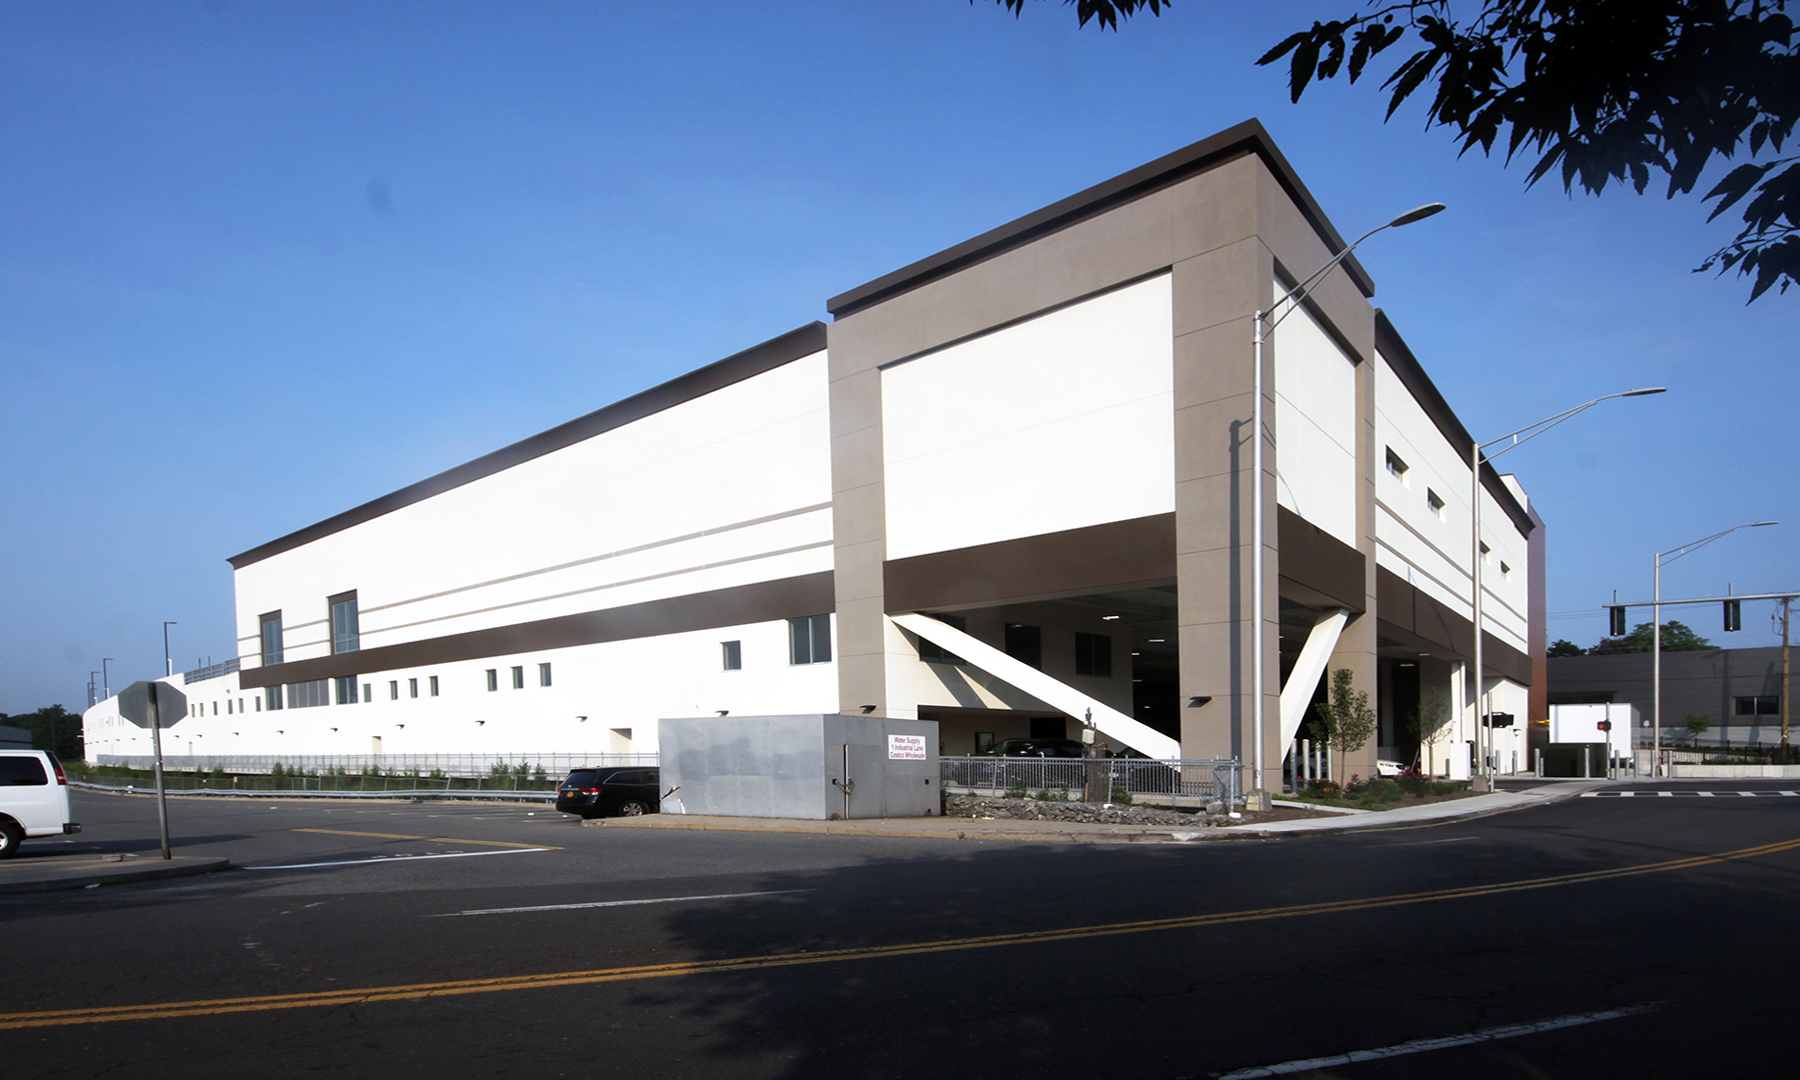 New Rochelle Department of Public Works:  A new, centralized facility for the City of New Rochelle’s Department of Public Works provides a state-of-the-art operations center along with vehicle and equipment repair and storage functions.